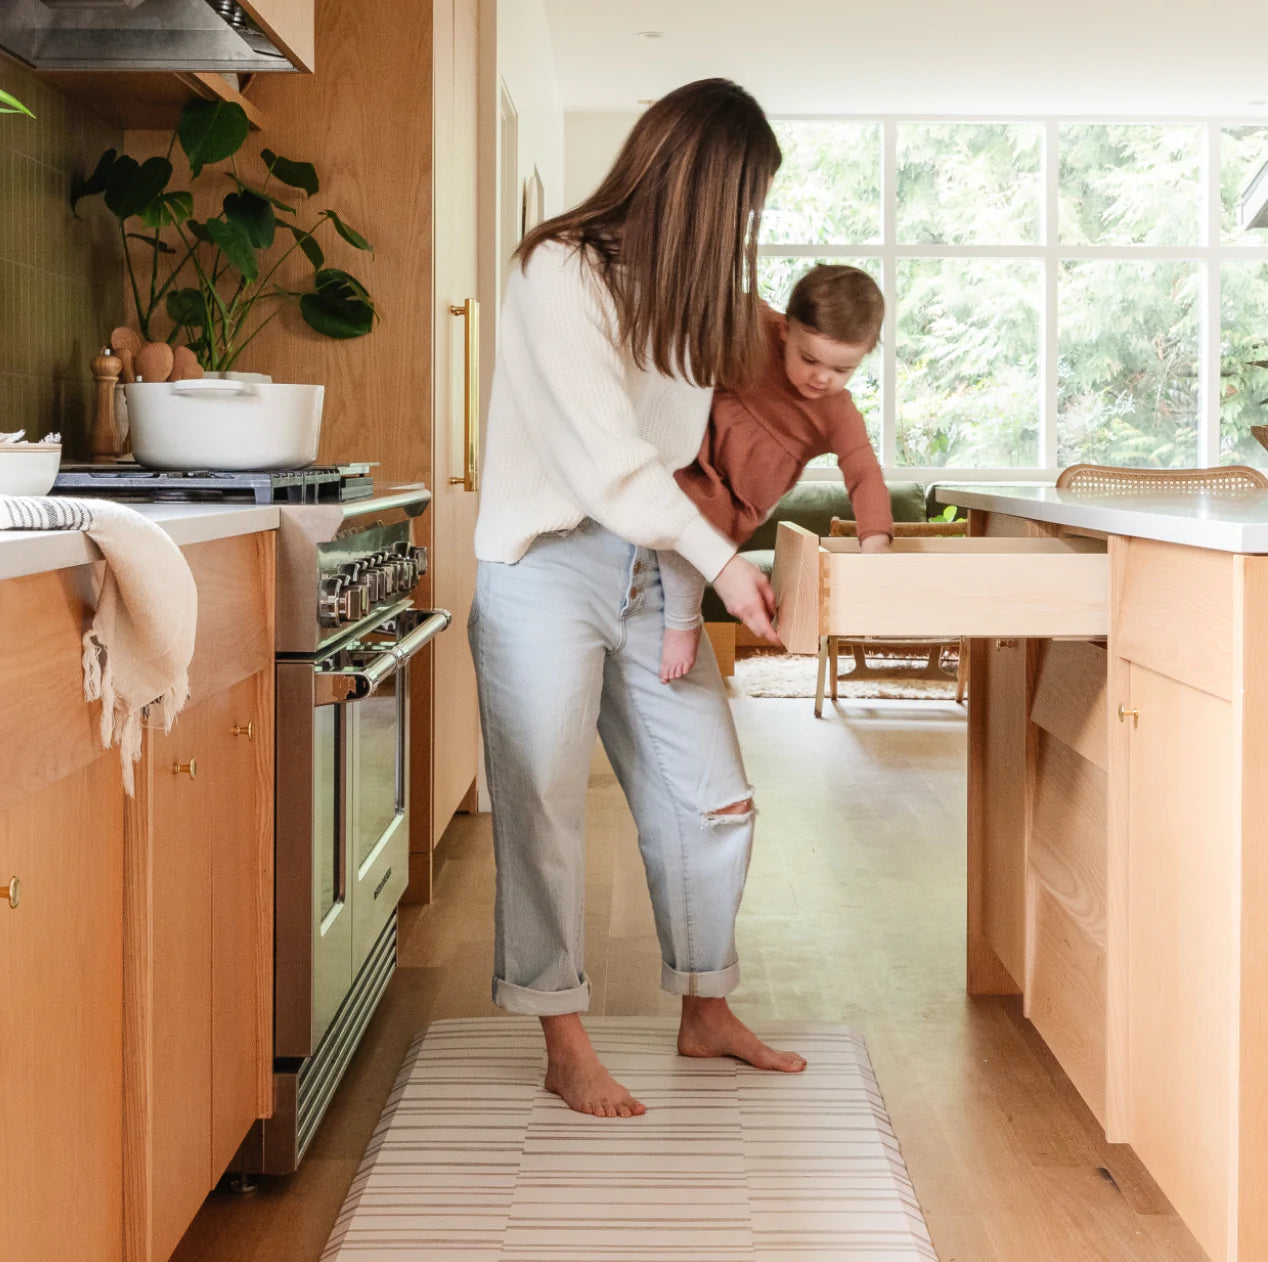 Nara natural beige and white inverted stripe kitchen mat with woman holding a baby standing on the mat in a kitchen.